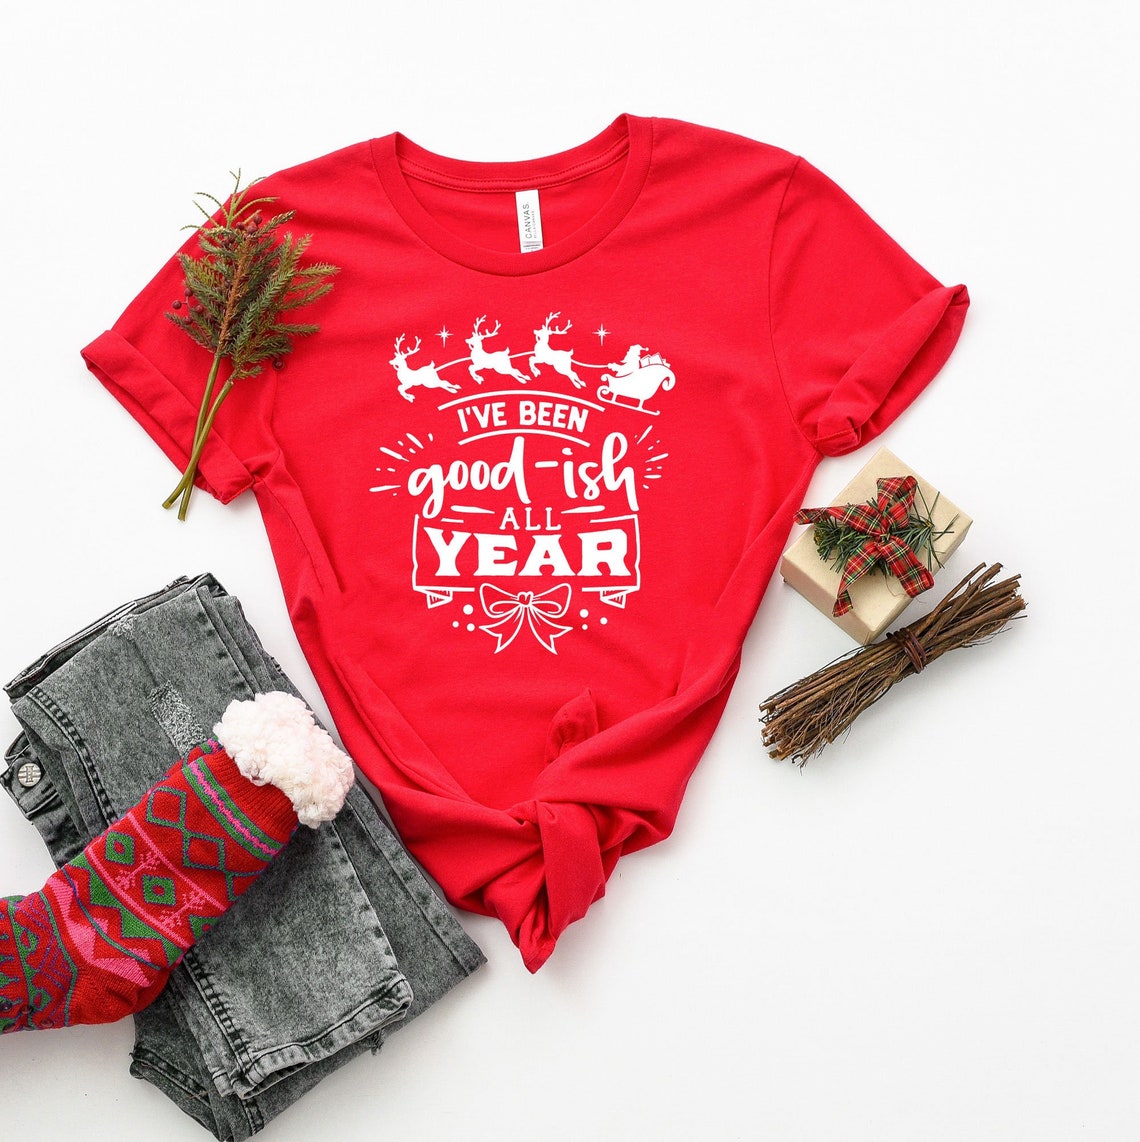 I've Been Goodish All Year Shirt, Funny Christmas Shirts, Family Matching Christmas Shirts, Dear Santa Ive been Goodish, Happy Christmas